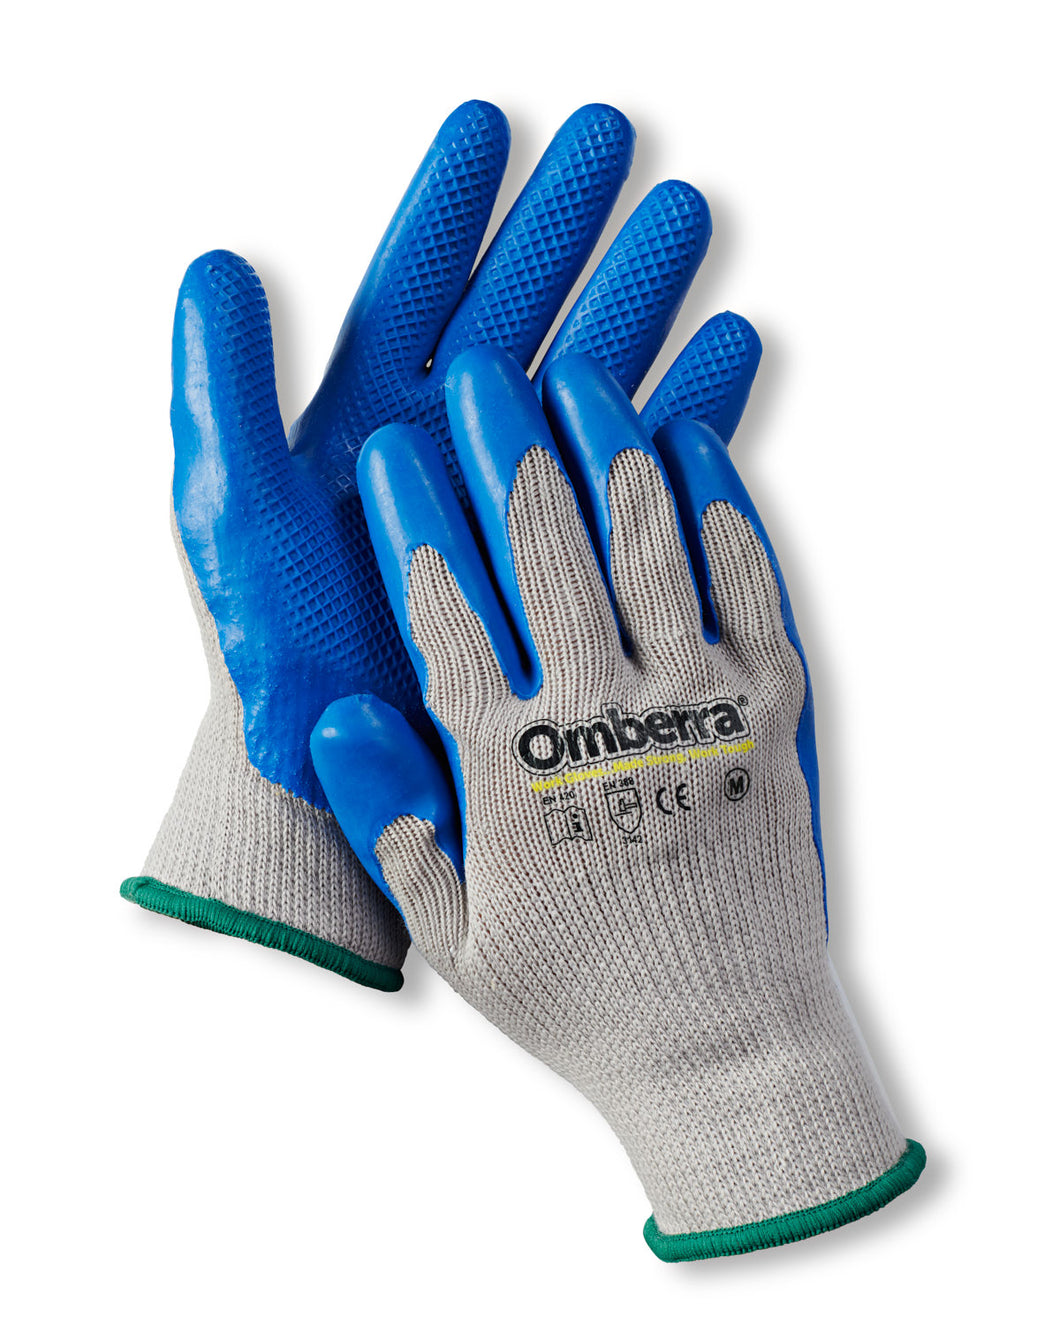 Work Gloves Utility Polyester Latex Palm 12 Pair Pack